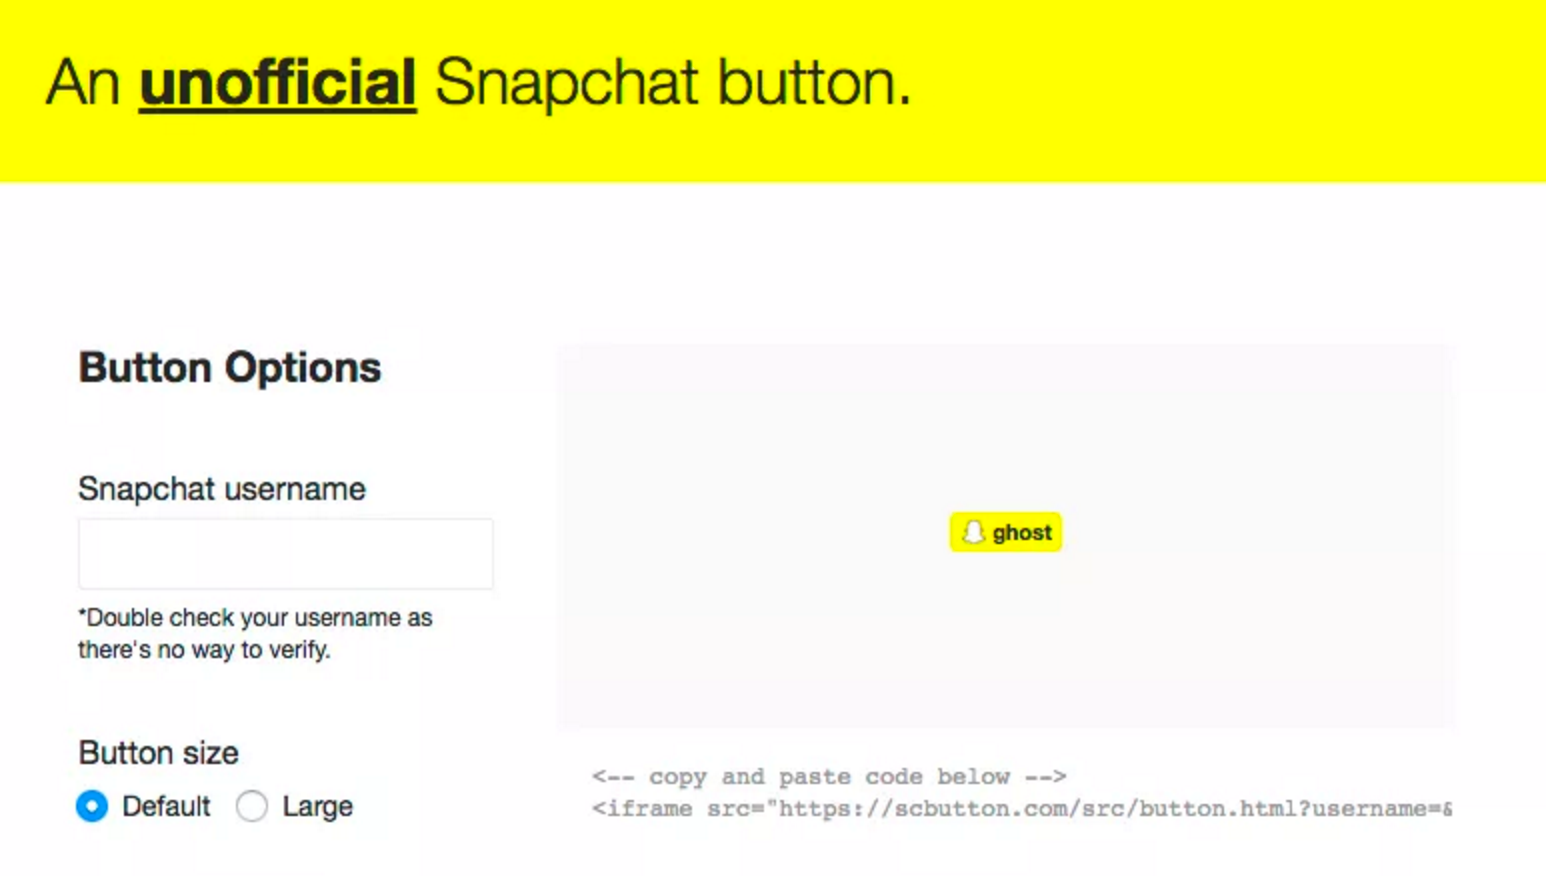 9 Tools & Resources That Will Turn You Into a Snapchat Pro - 1546 x 876 png 251kB